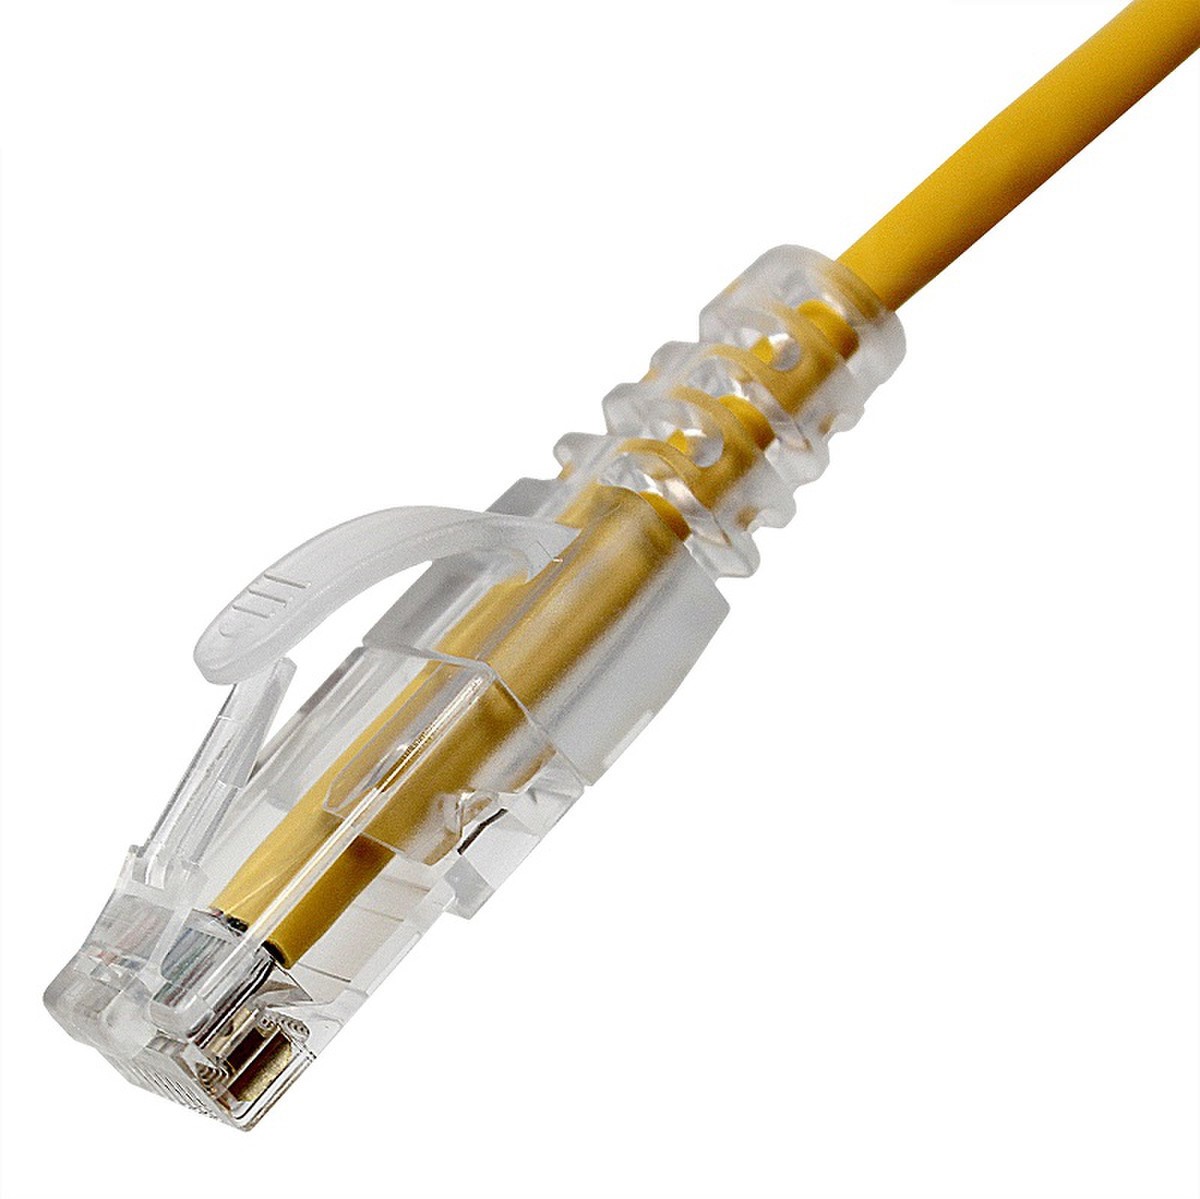 Black-Stone Cat6 UTP Patch cord, 10ft, Yellow - BSUS10F600-YL-CM